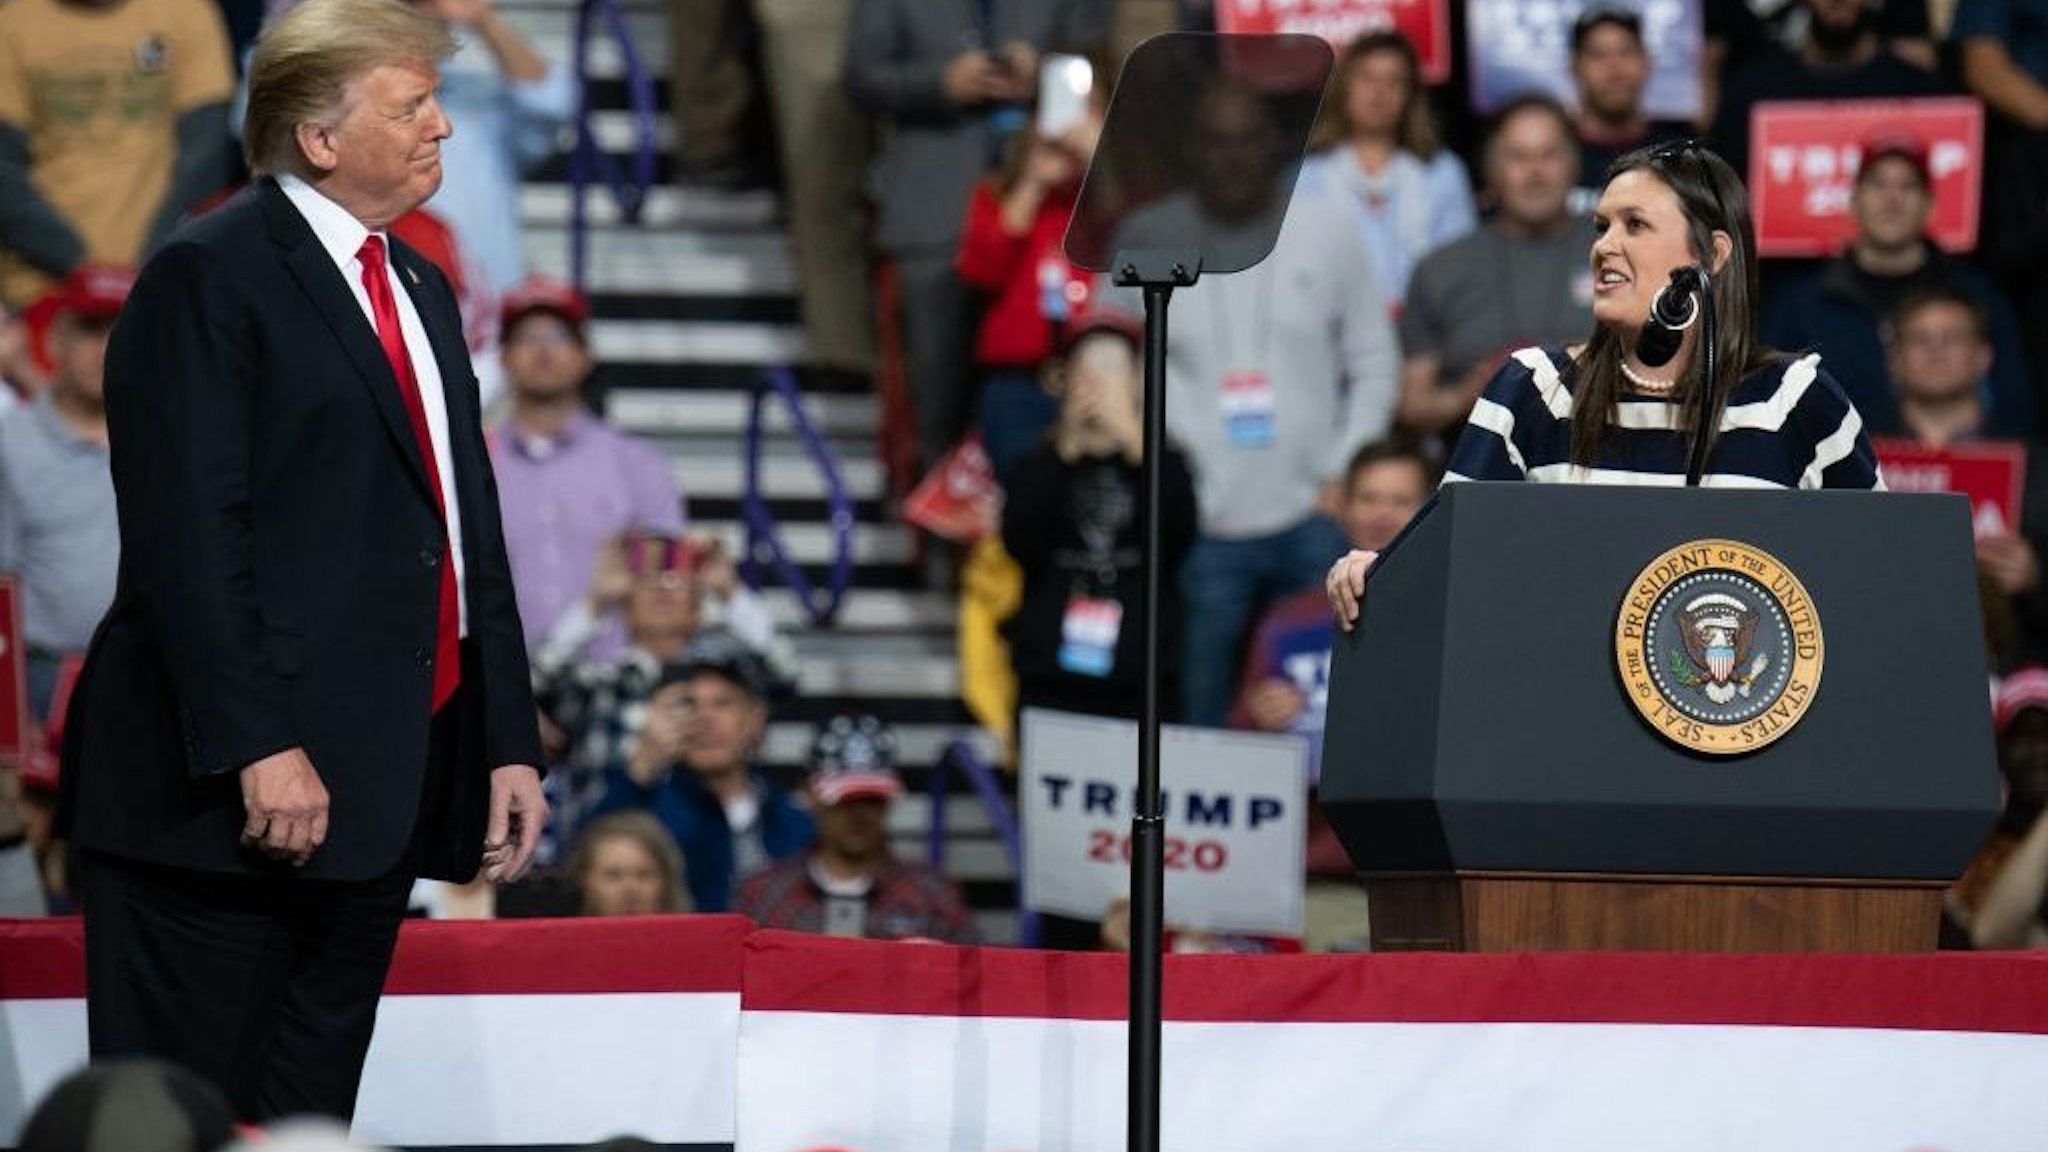 White House Press Secretary Sarah Huckabee Sanders (R) speaks alongside US President Donald Trump during a Make America Great Again rally in Green Bay, Wisconsin, April 27, 2019. (Photo by SAUL LOEB / AFP) (Photo credit should read SAUL LOEB/AFP via Getty Images)